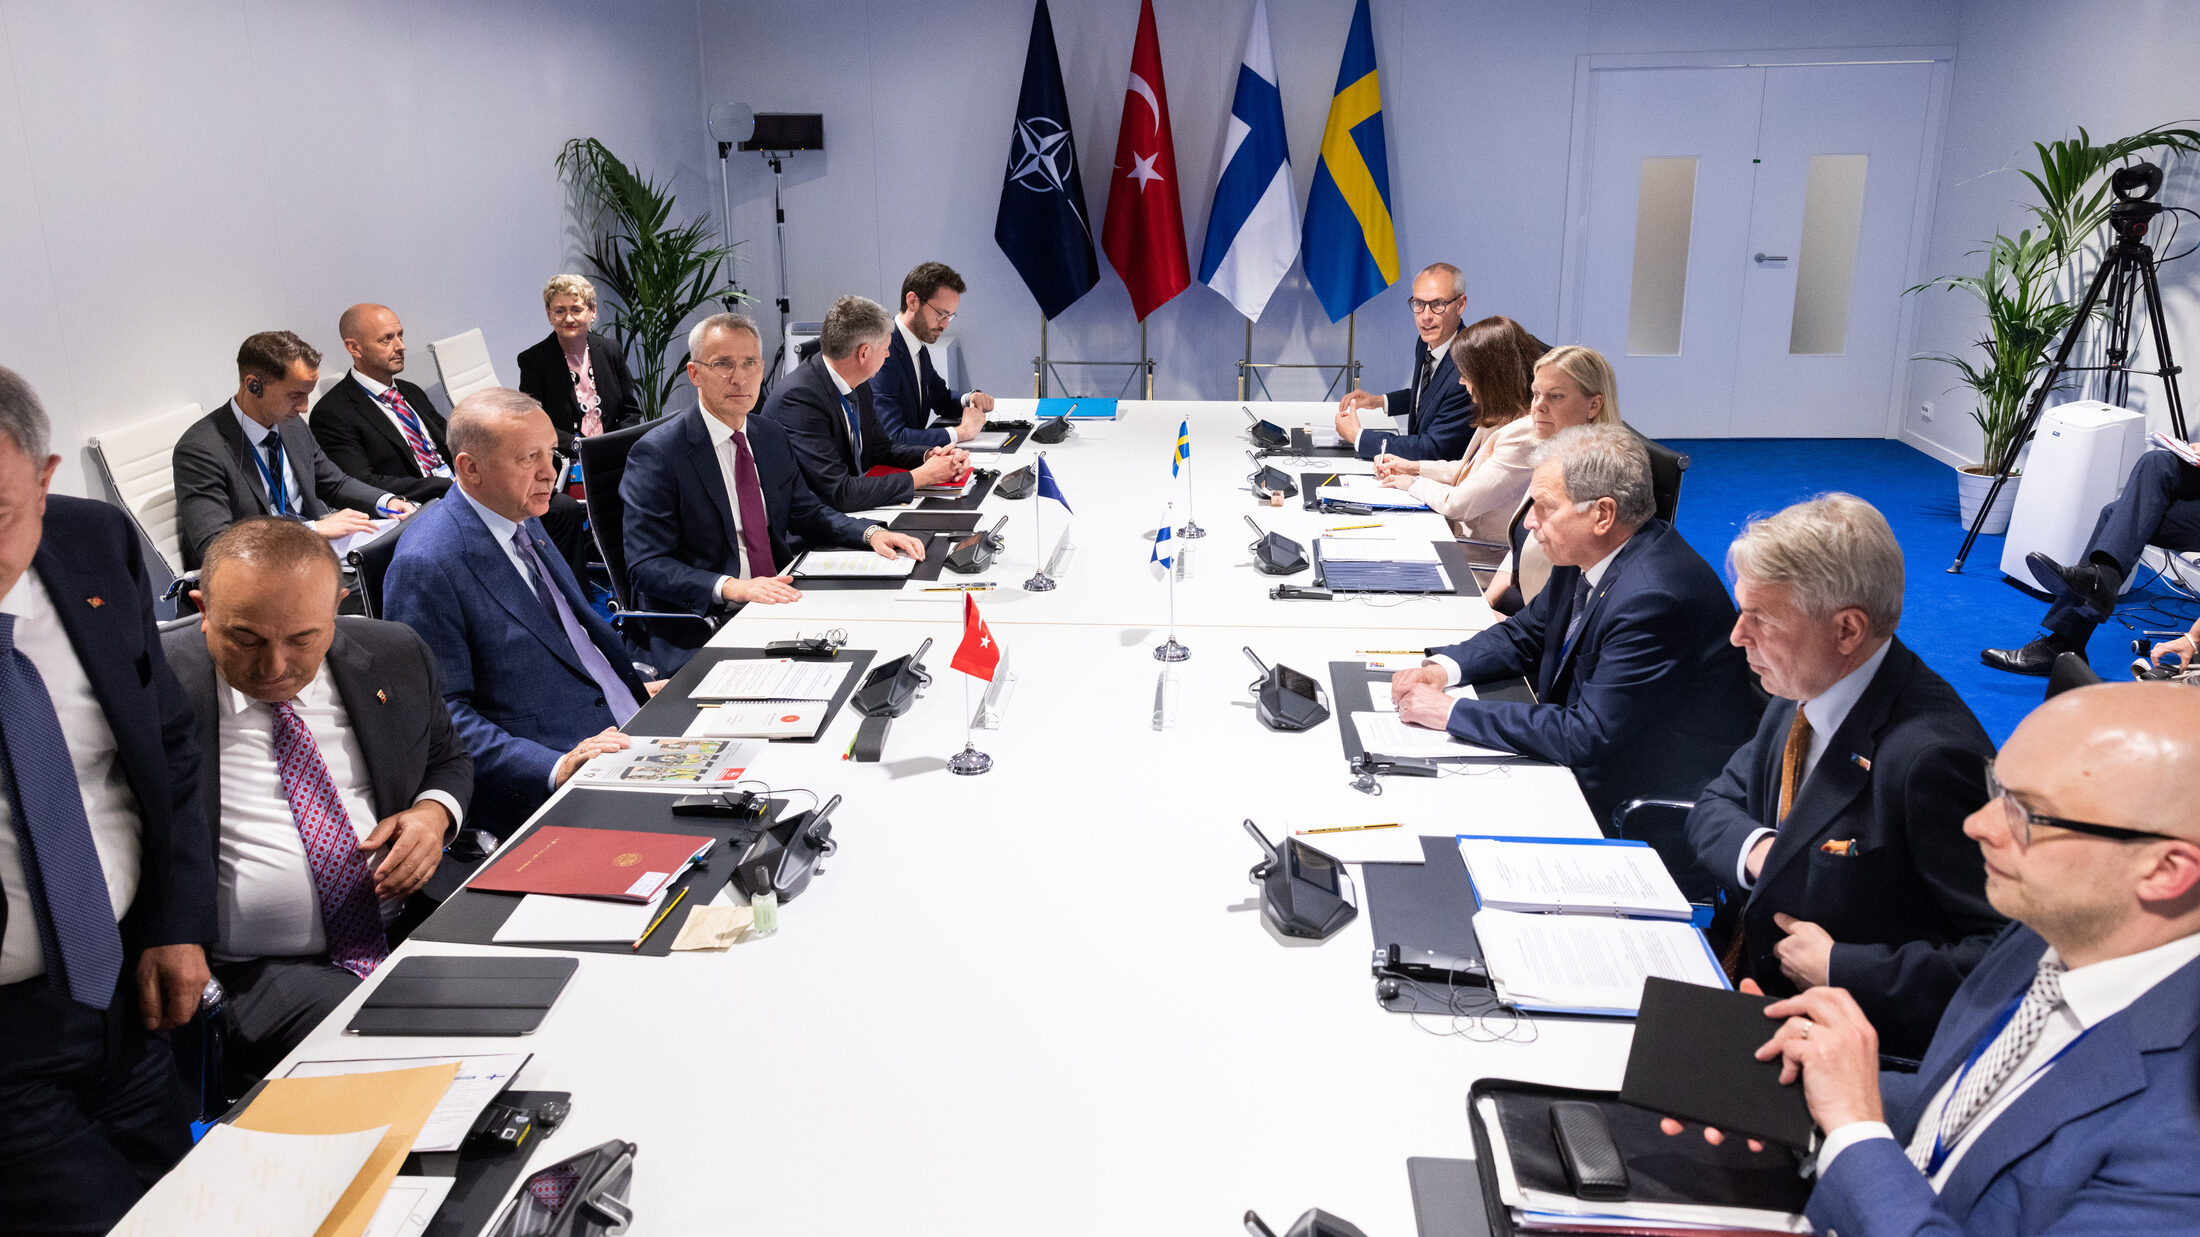 Sweden's NATO membership hangs in the balance with Turkey's election